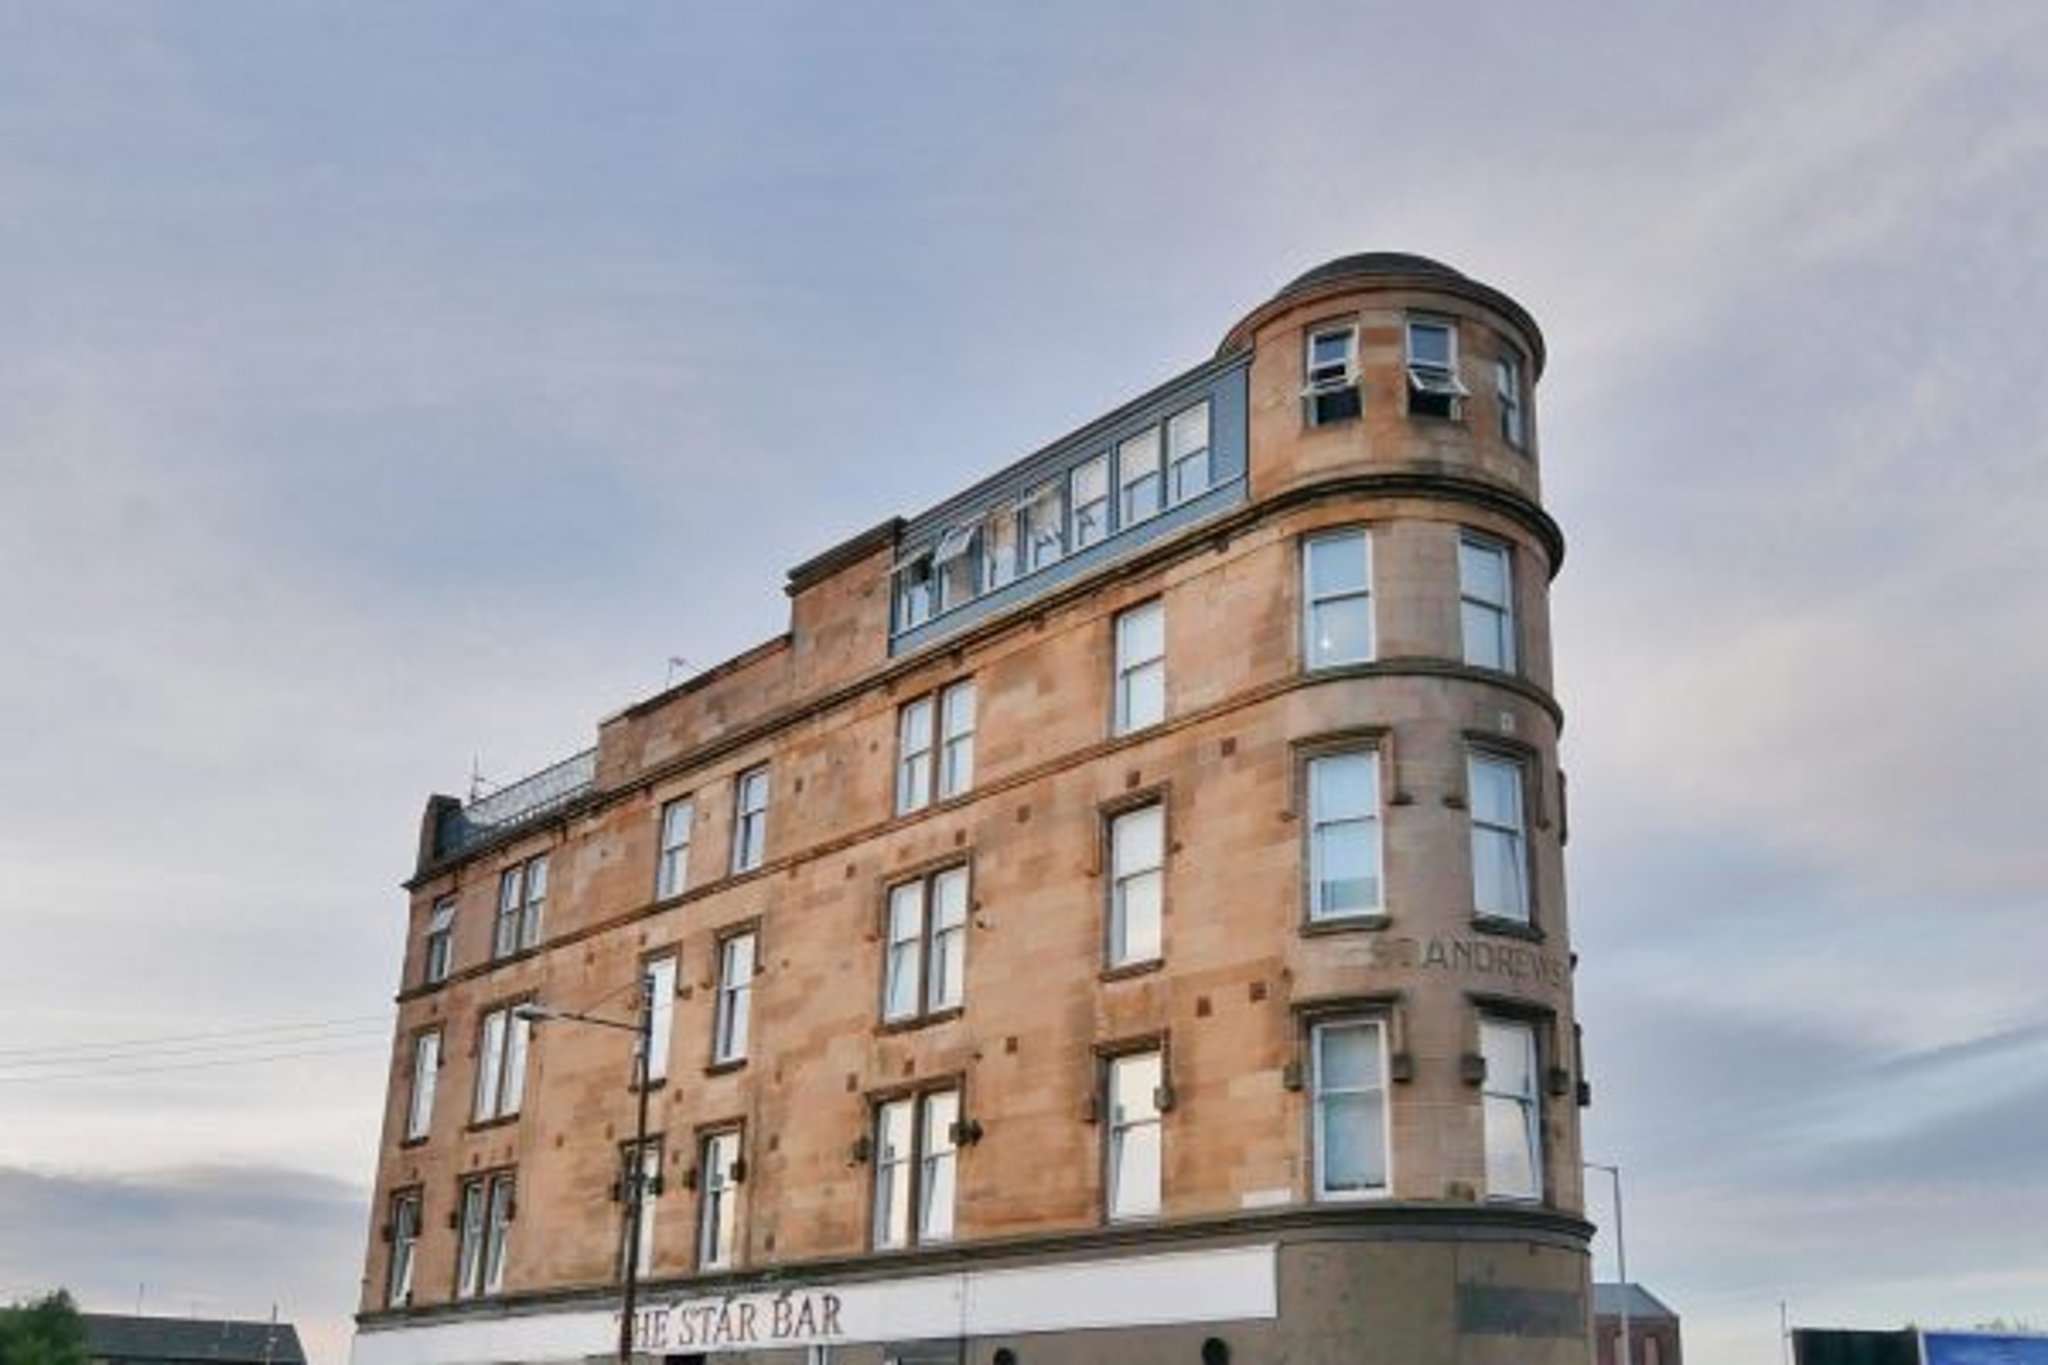 Modern One Bedroom Flat With Private Roof Garden For Sale At Bargain Price In Iconic Glasgow Building The Scotsman